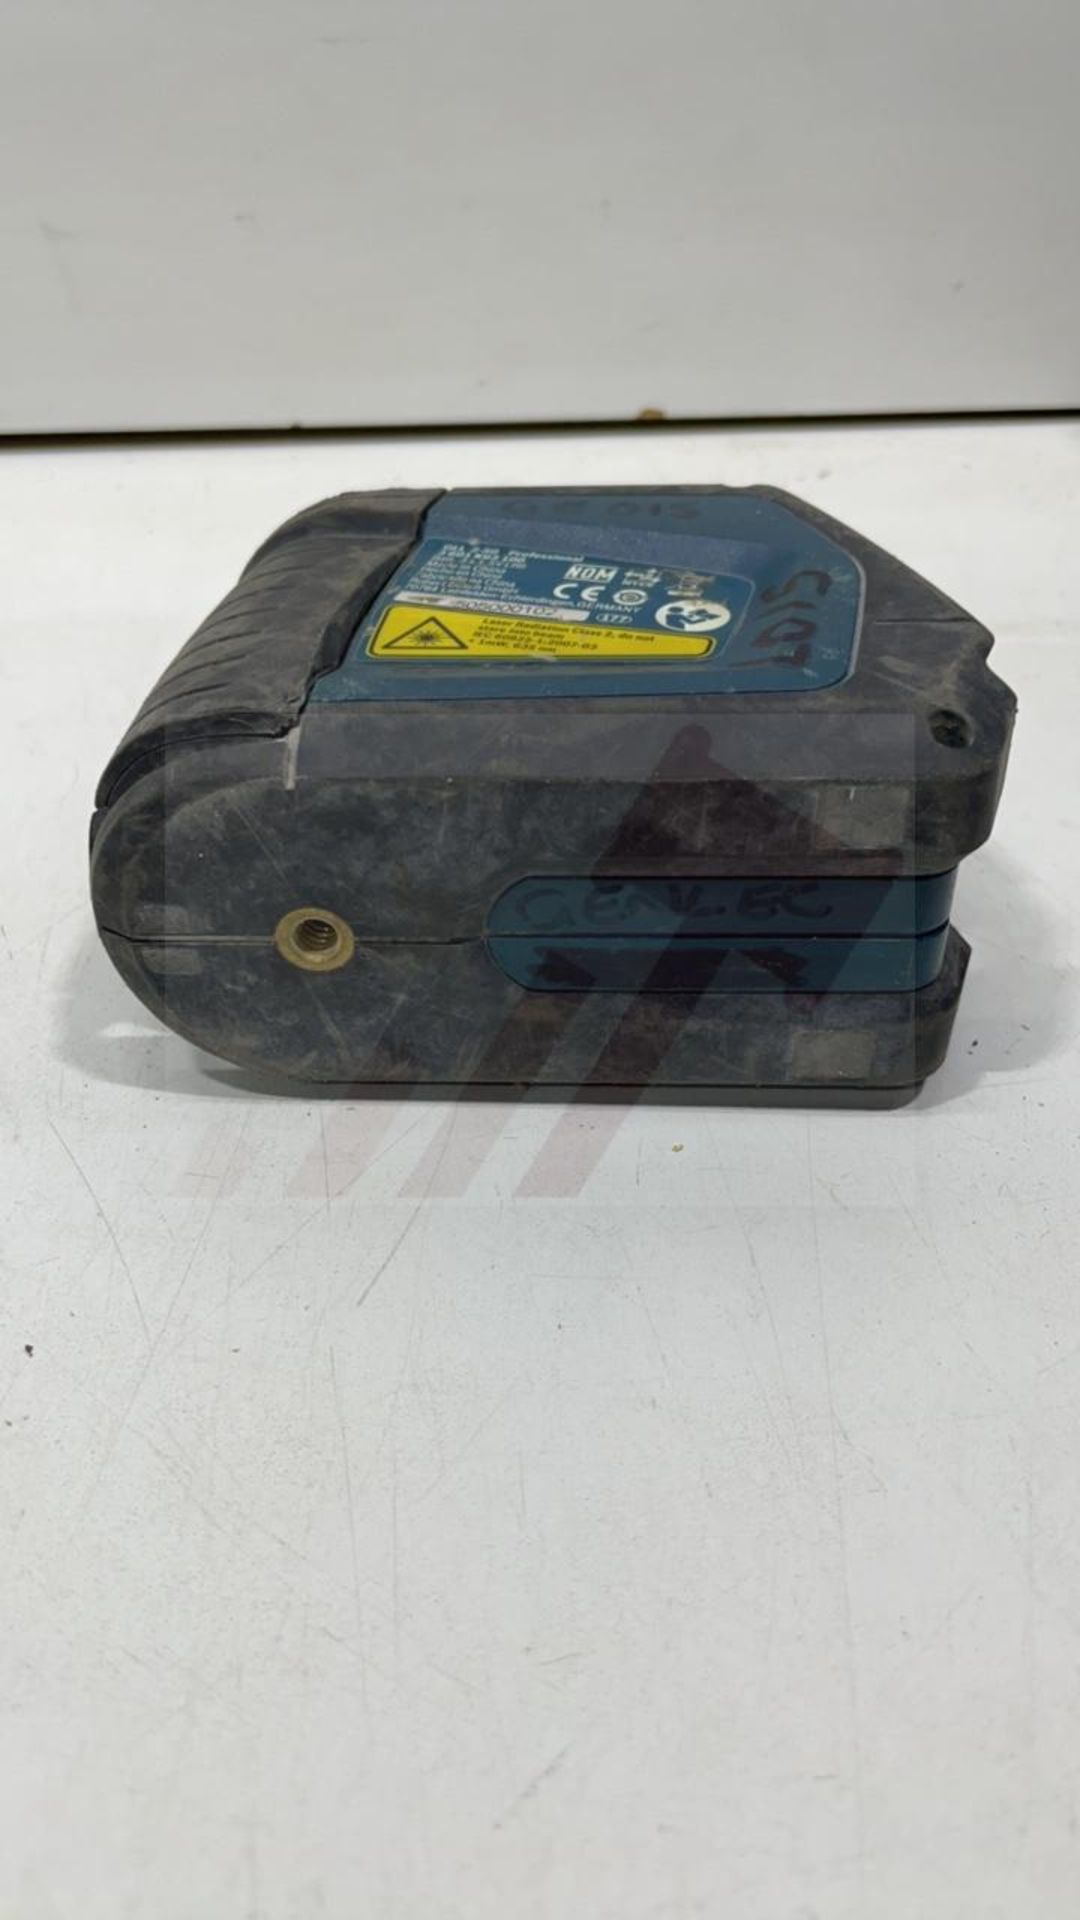 Bosch Professional Laser Level | **MISSING ALL ACCESSORIES GLL 2-50 ONLY** - Image 6 of 7